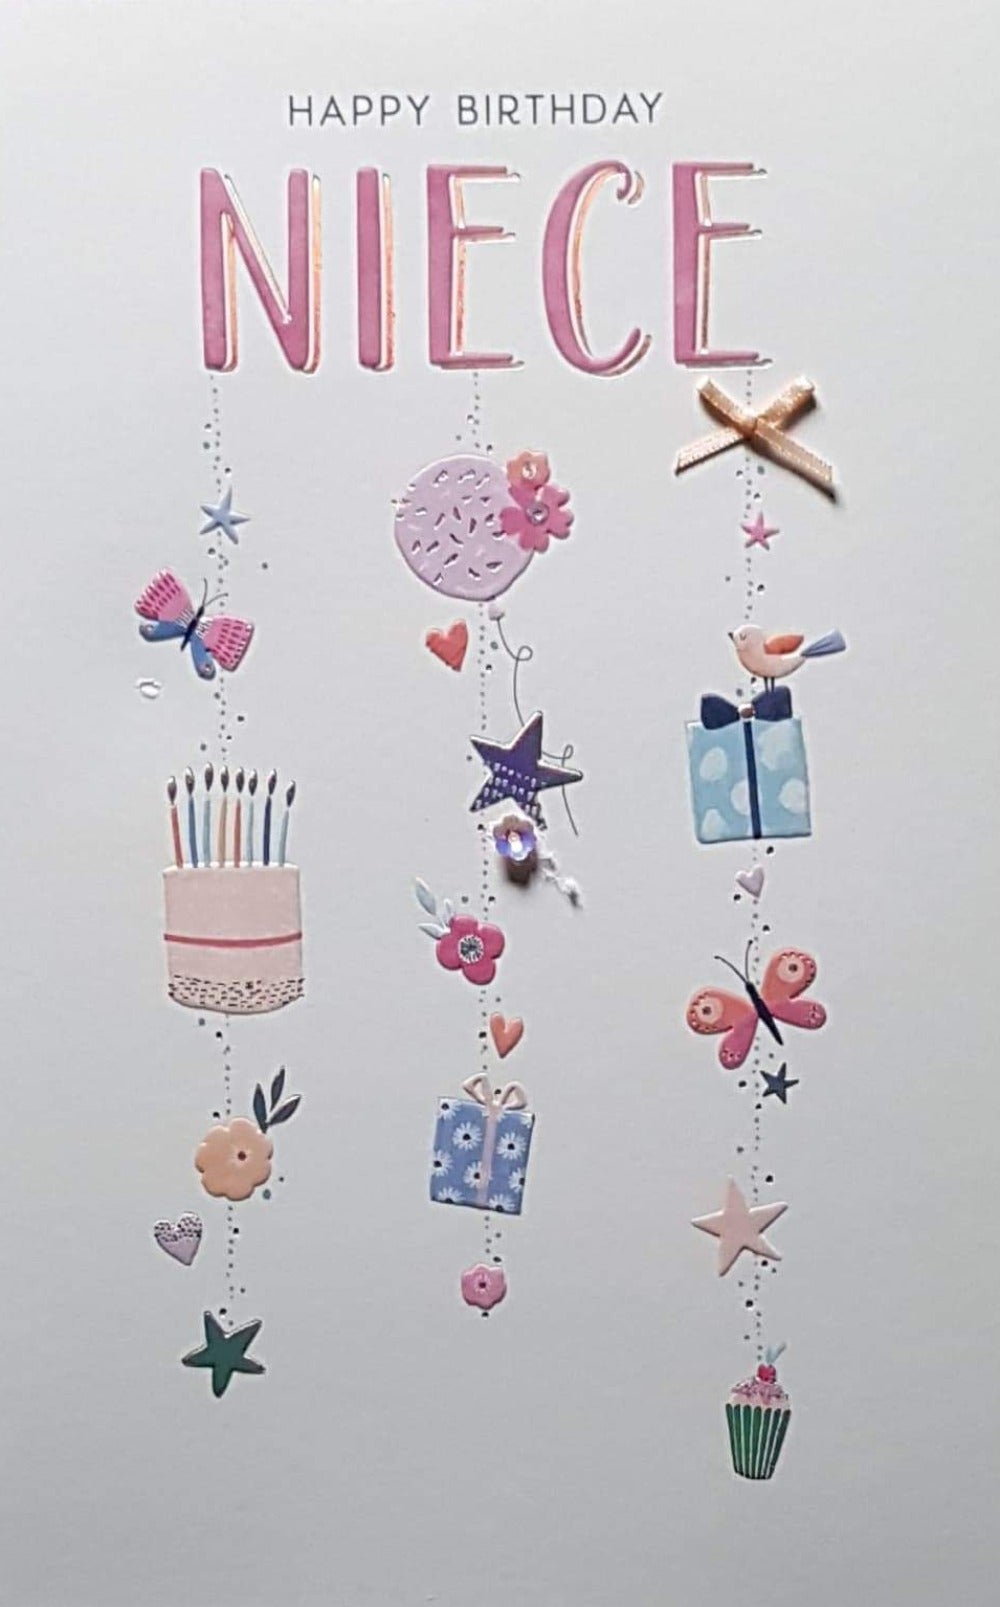 Birthday Card - Niece / Assorted Gifts Hanging